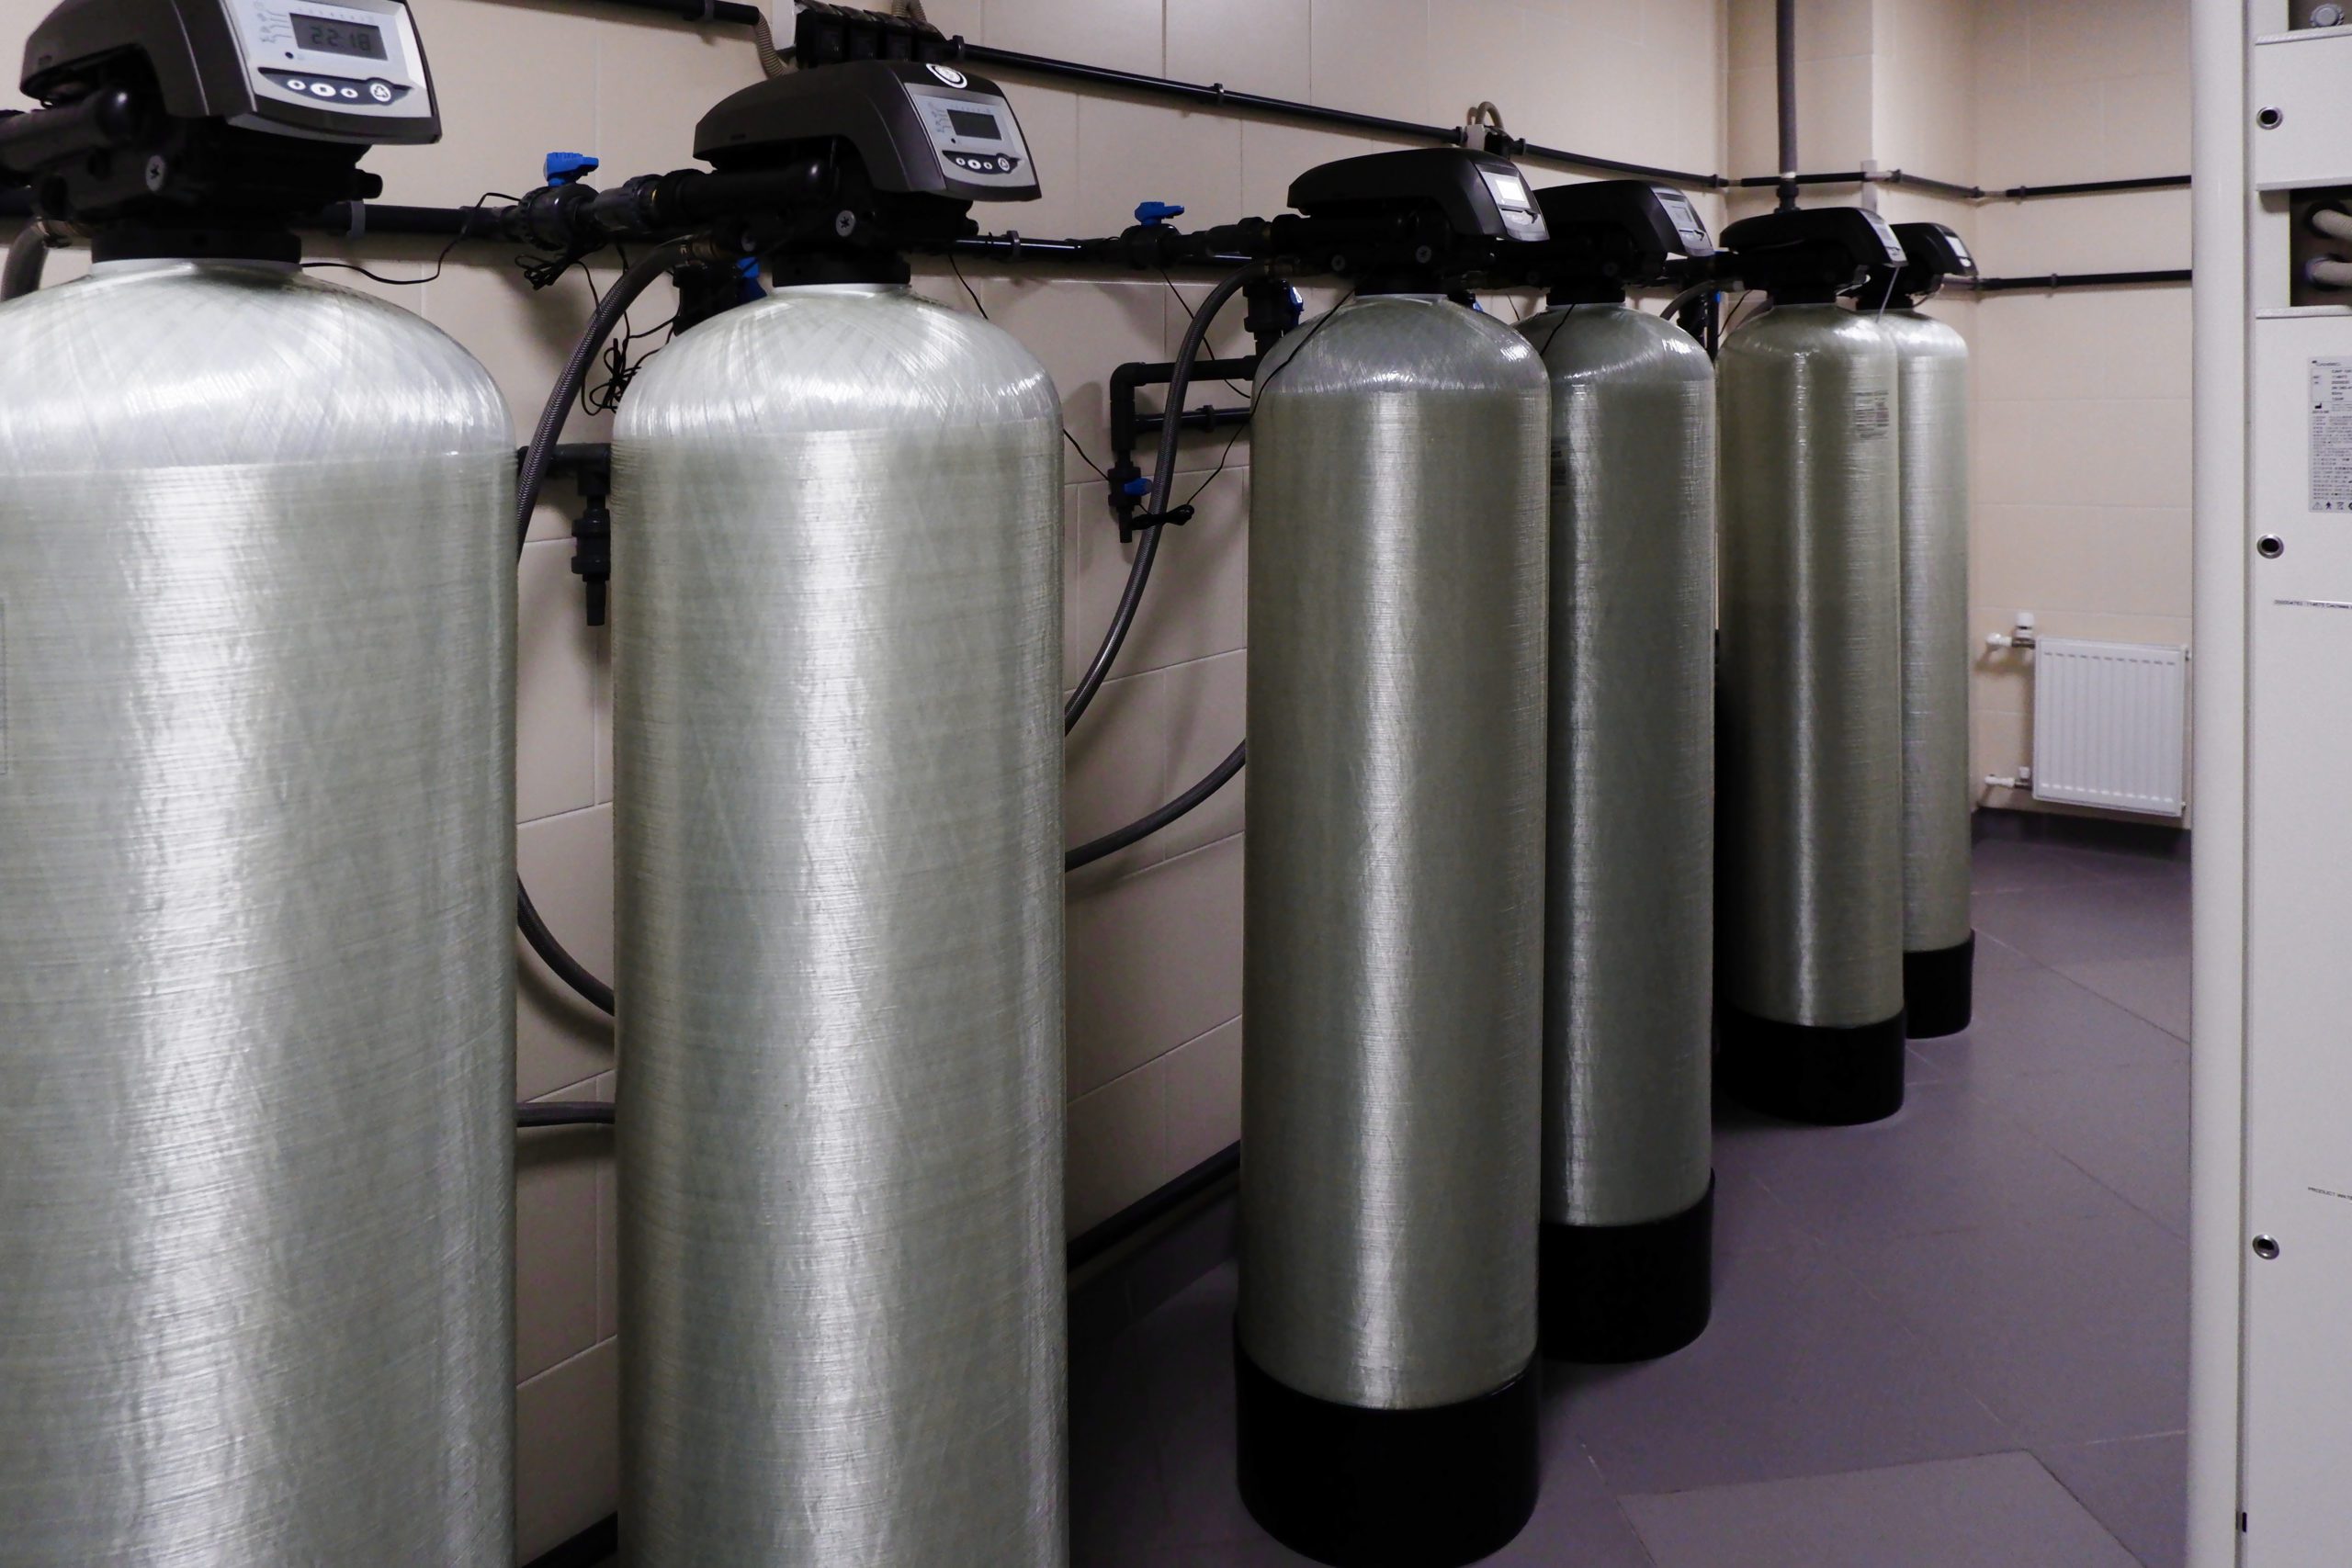 Water Softeners Line Up in a Row